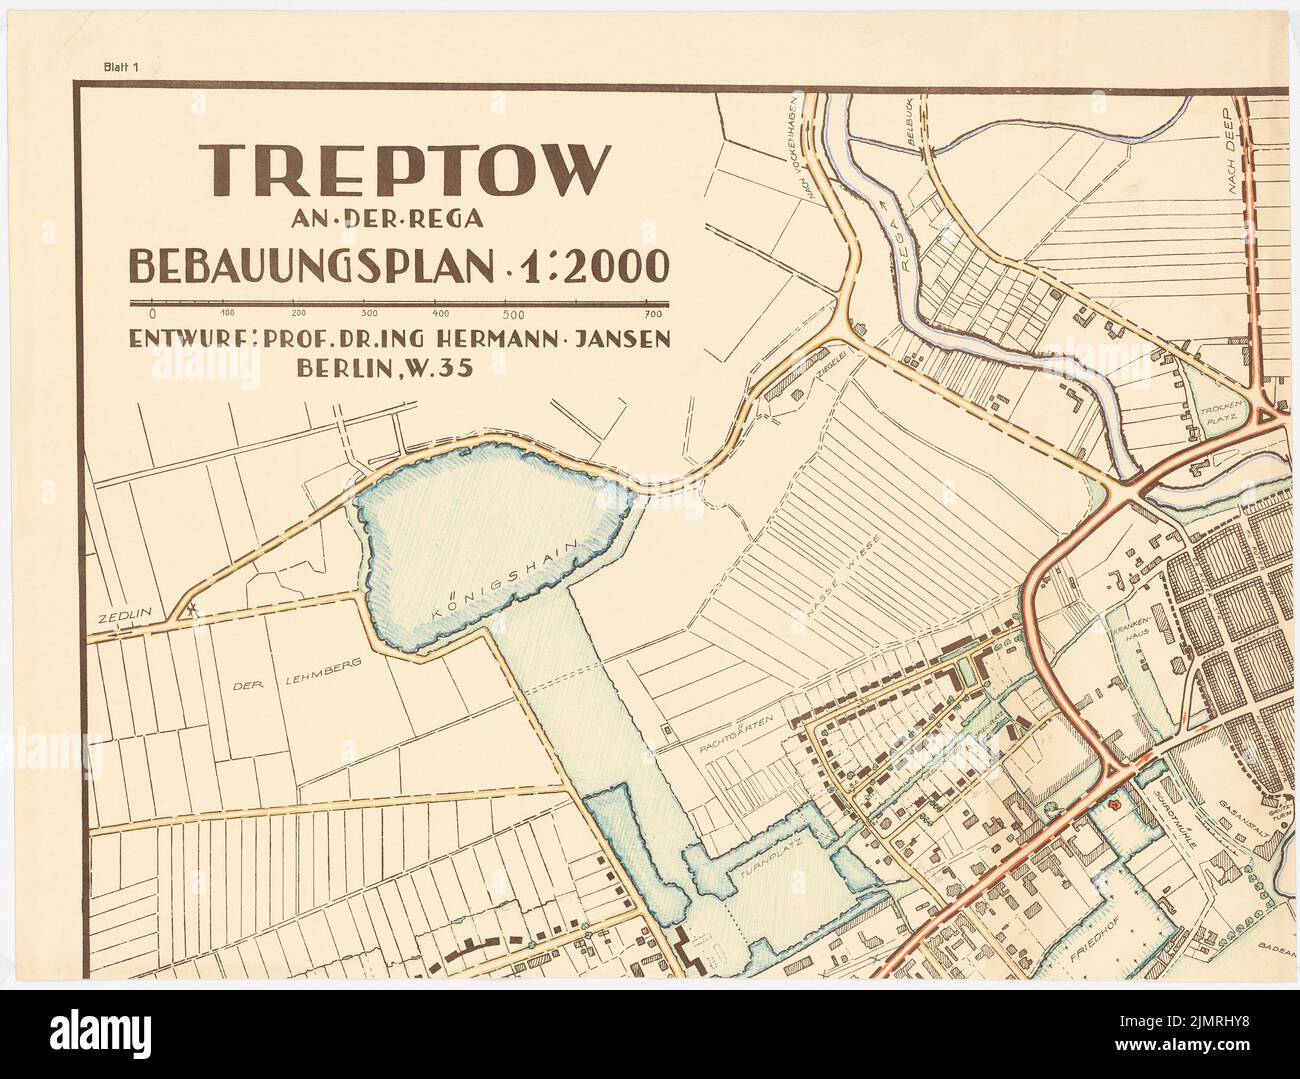 Jansen Hermann (1869-1945), development plan of the city expansion, Treptow/Rega (January 10, 1927): Basic plan and site plan 1: 2000, consisting of four leaves: Inv.No. 21409, 21410, 21411, 21412, here sheet 1, scale bar. Colored pencils over pressure on cardboard, 69.5 x 91.3 cm (including scan edges) Jansen Hermann  (1869-1945): Bebauungsplan der Stadterweiterung, Treptow/Rega Stock Photo